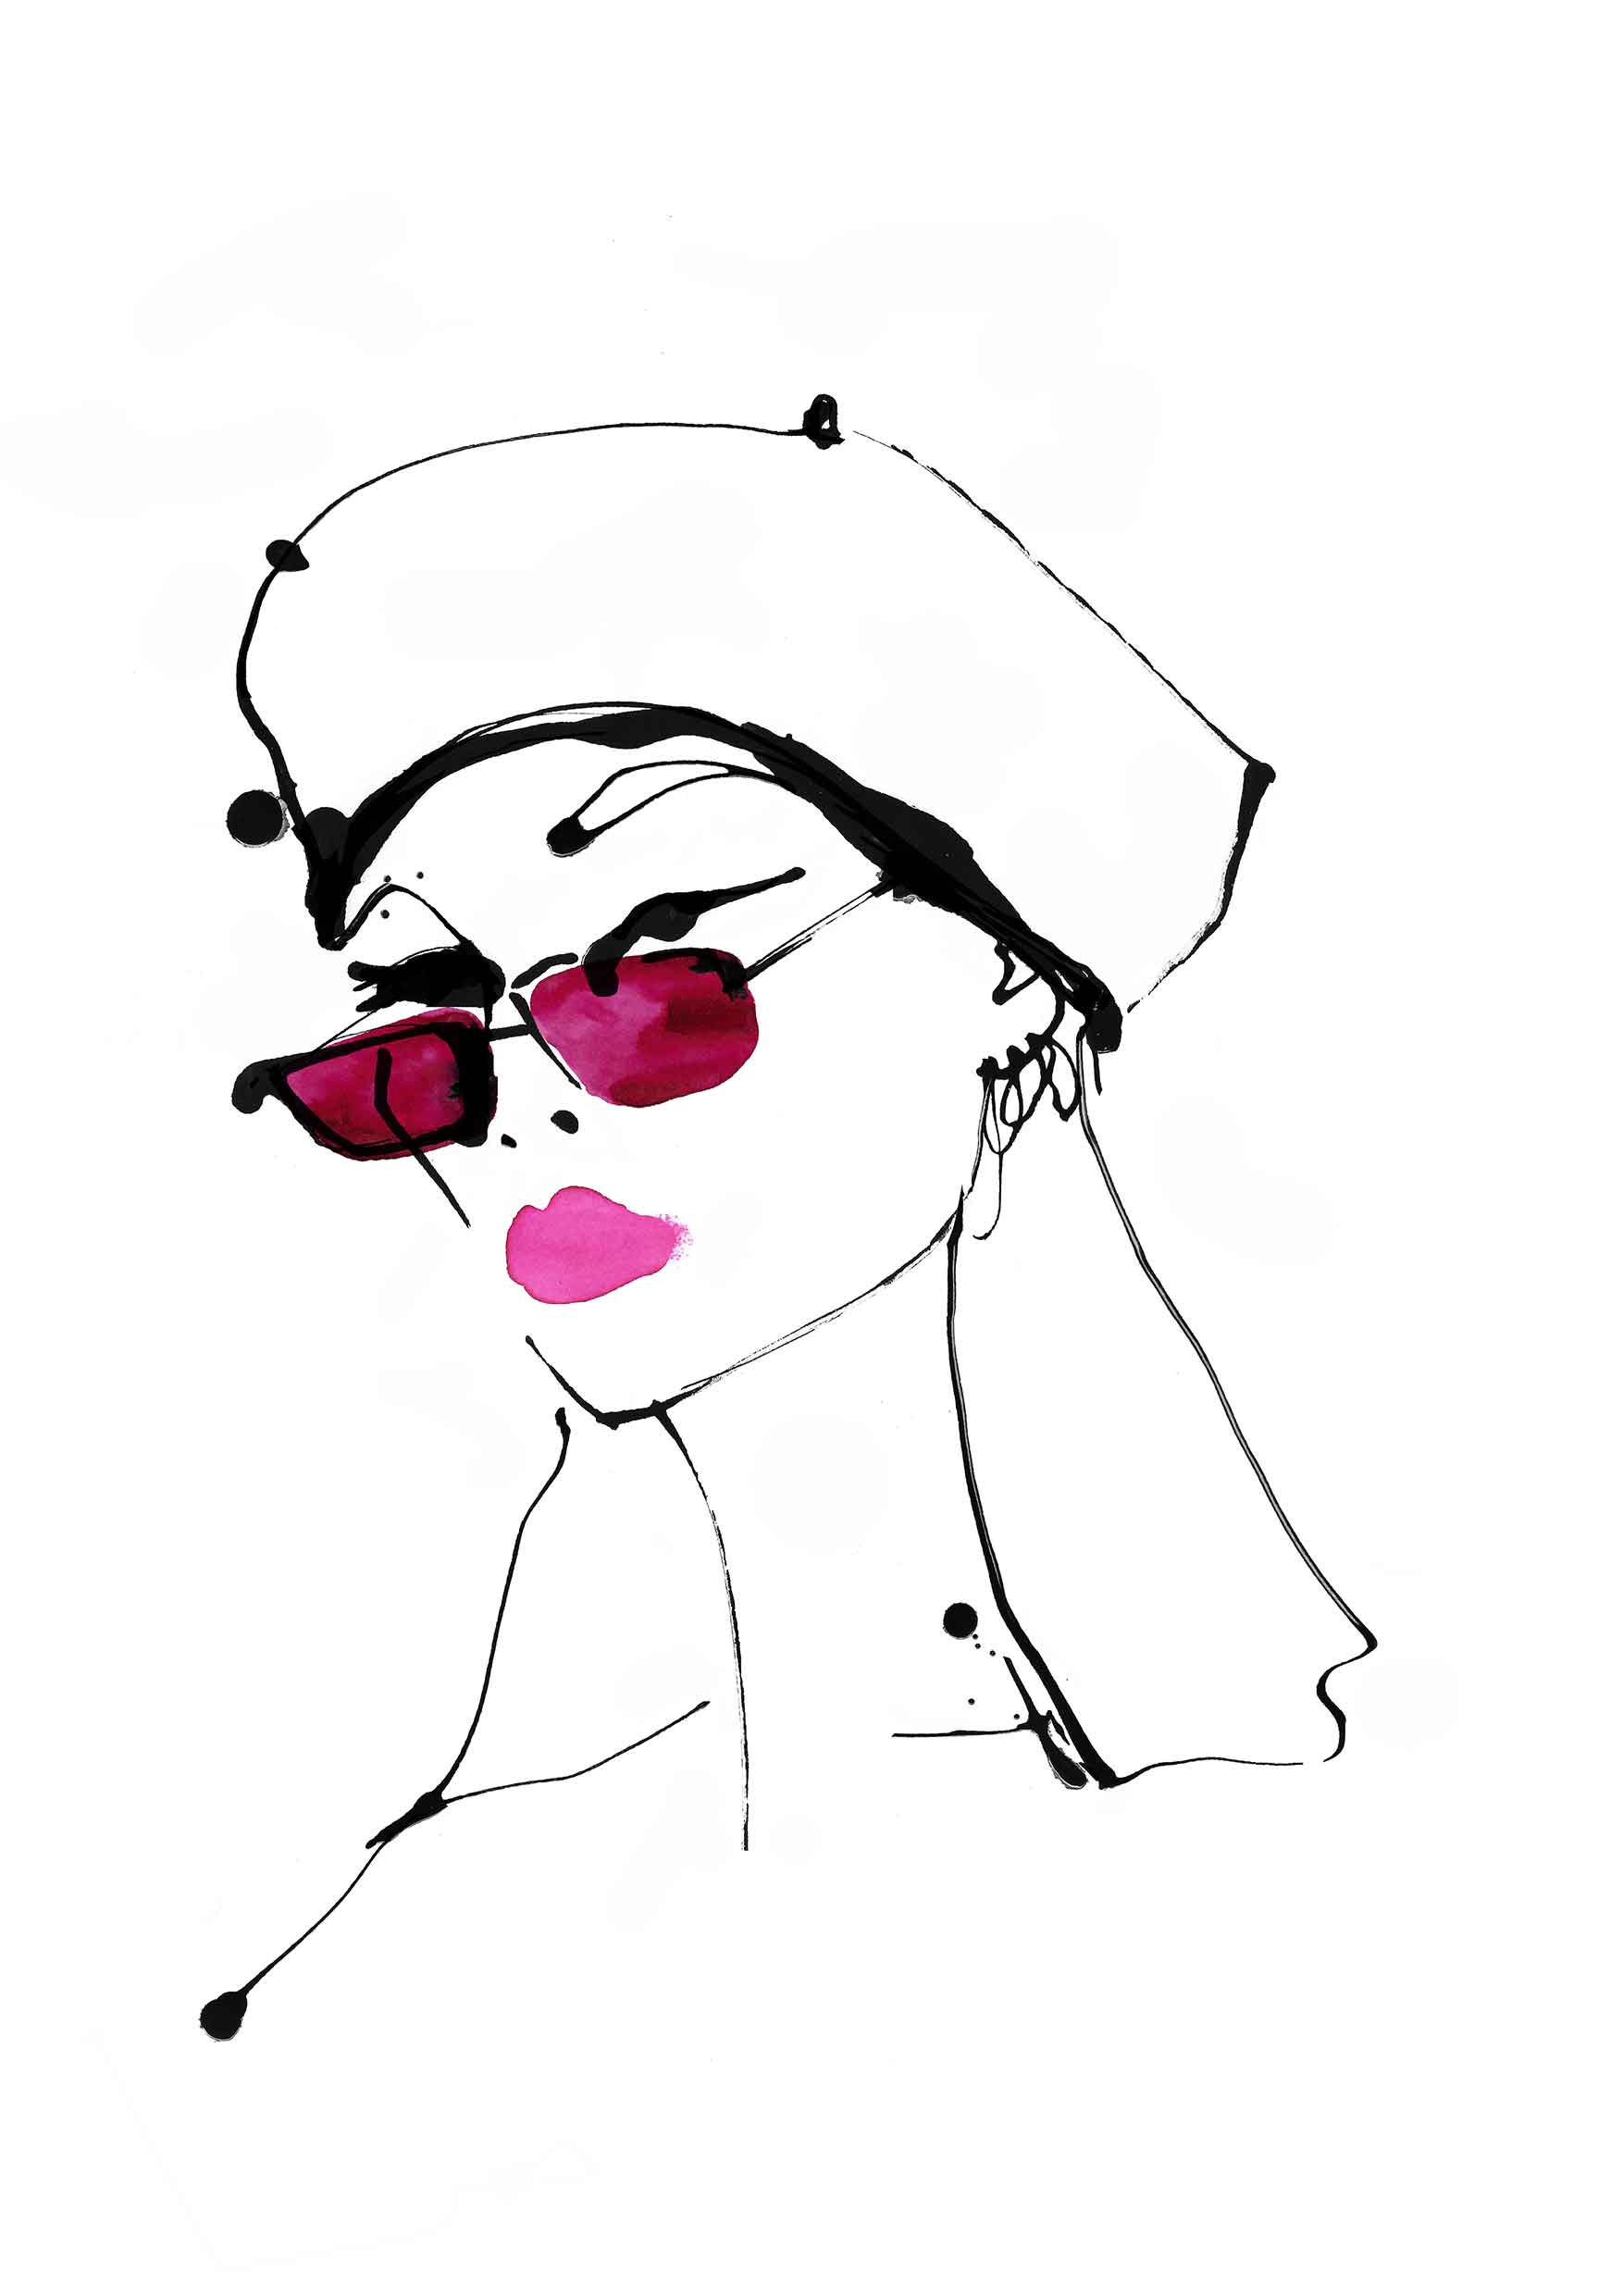 Fashion illustration hand drawn in ink. Woman in beret and pink sunglasses. Street style inspired fashion illustration.